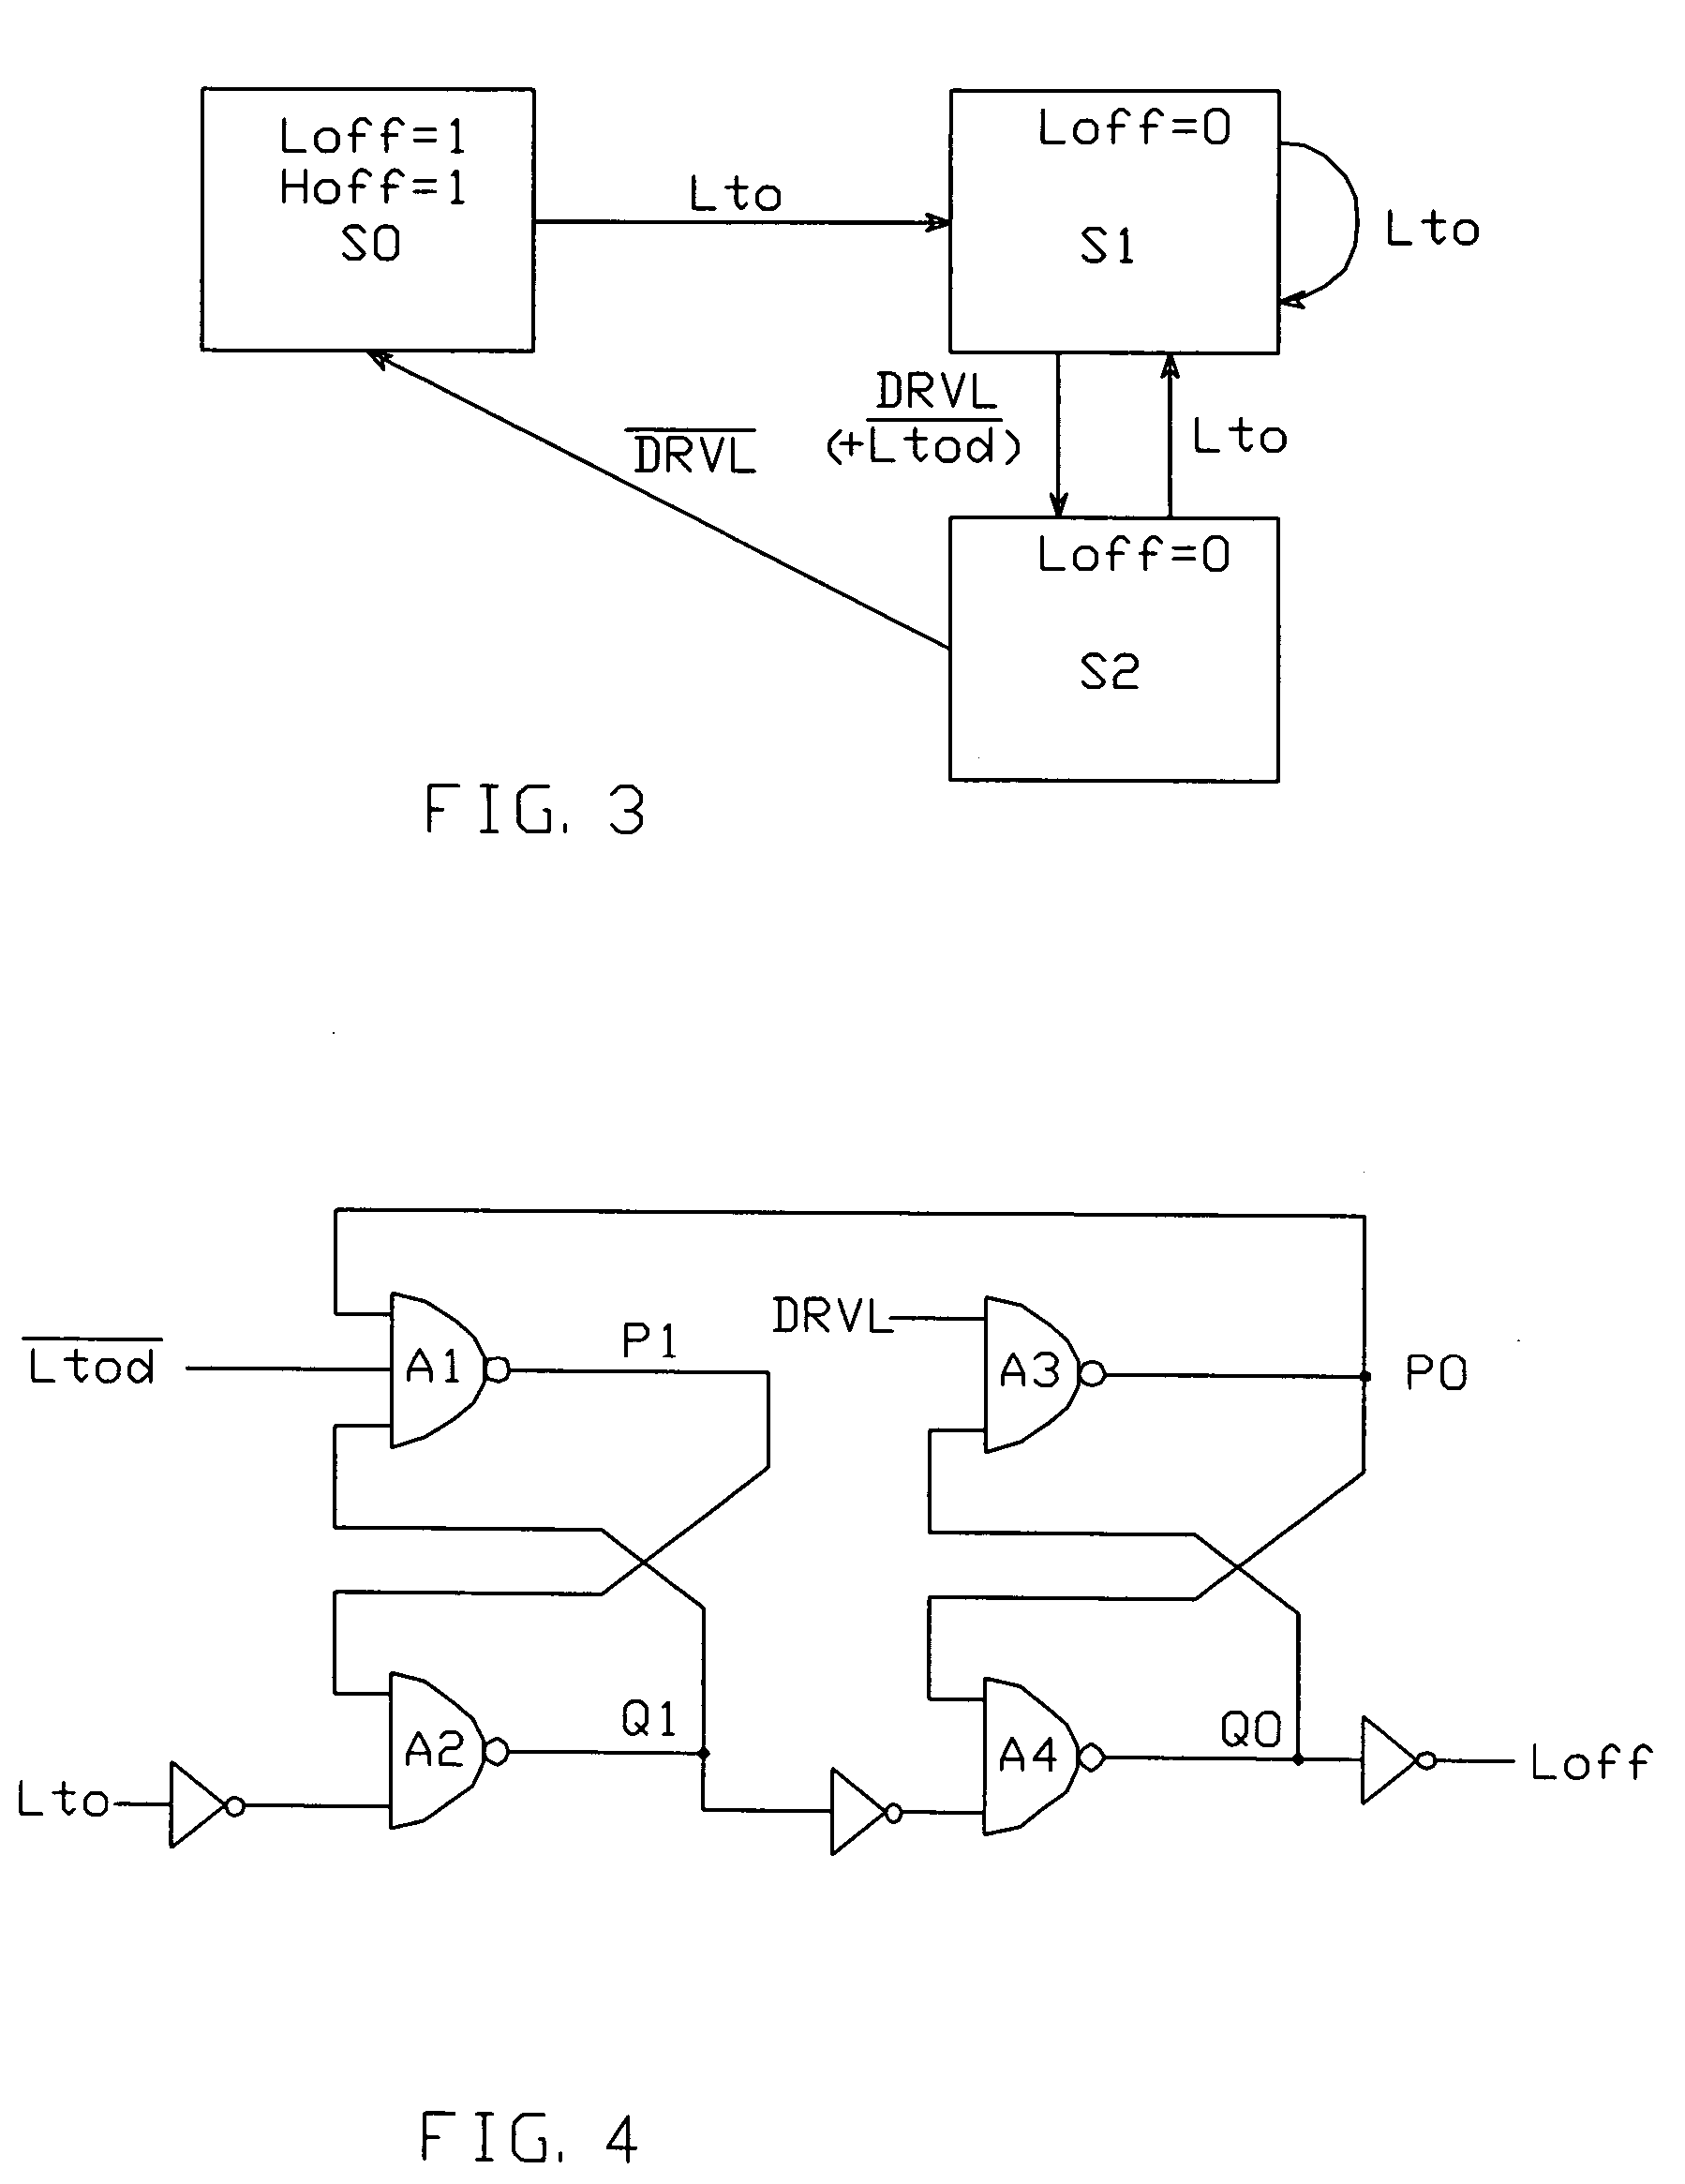 Anti-cross conduction drive control circuit and method